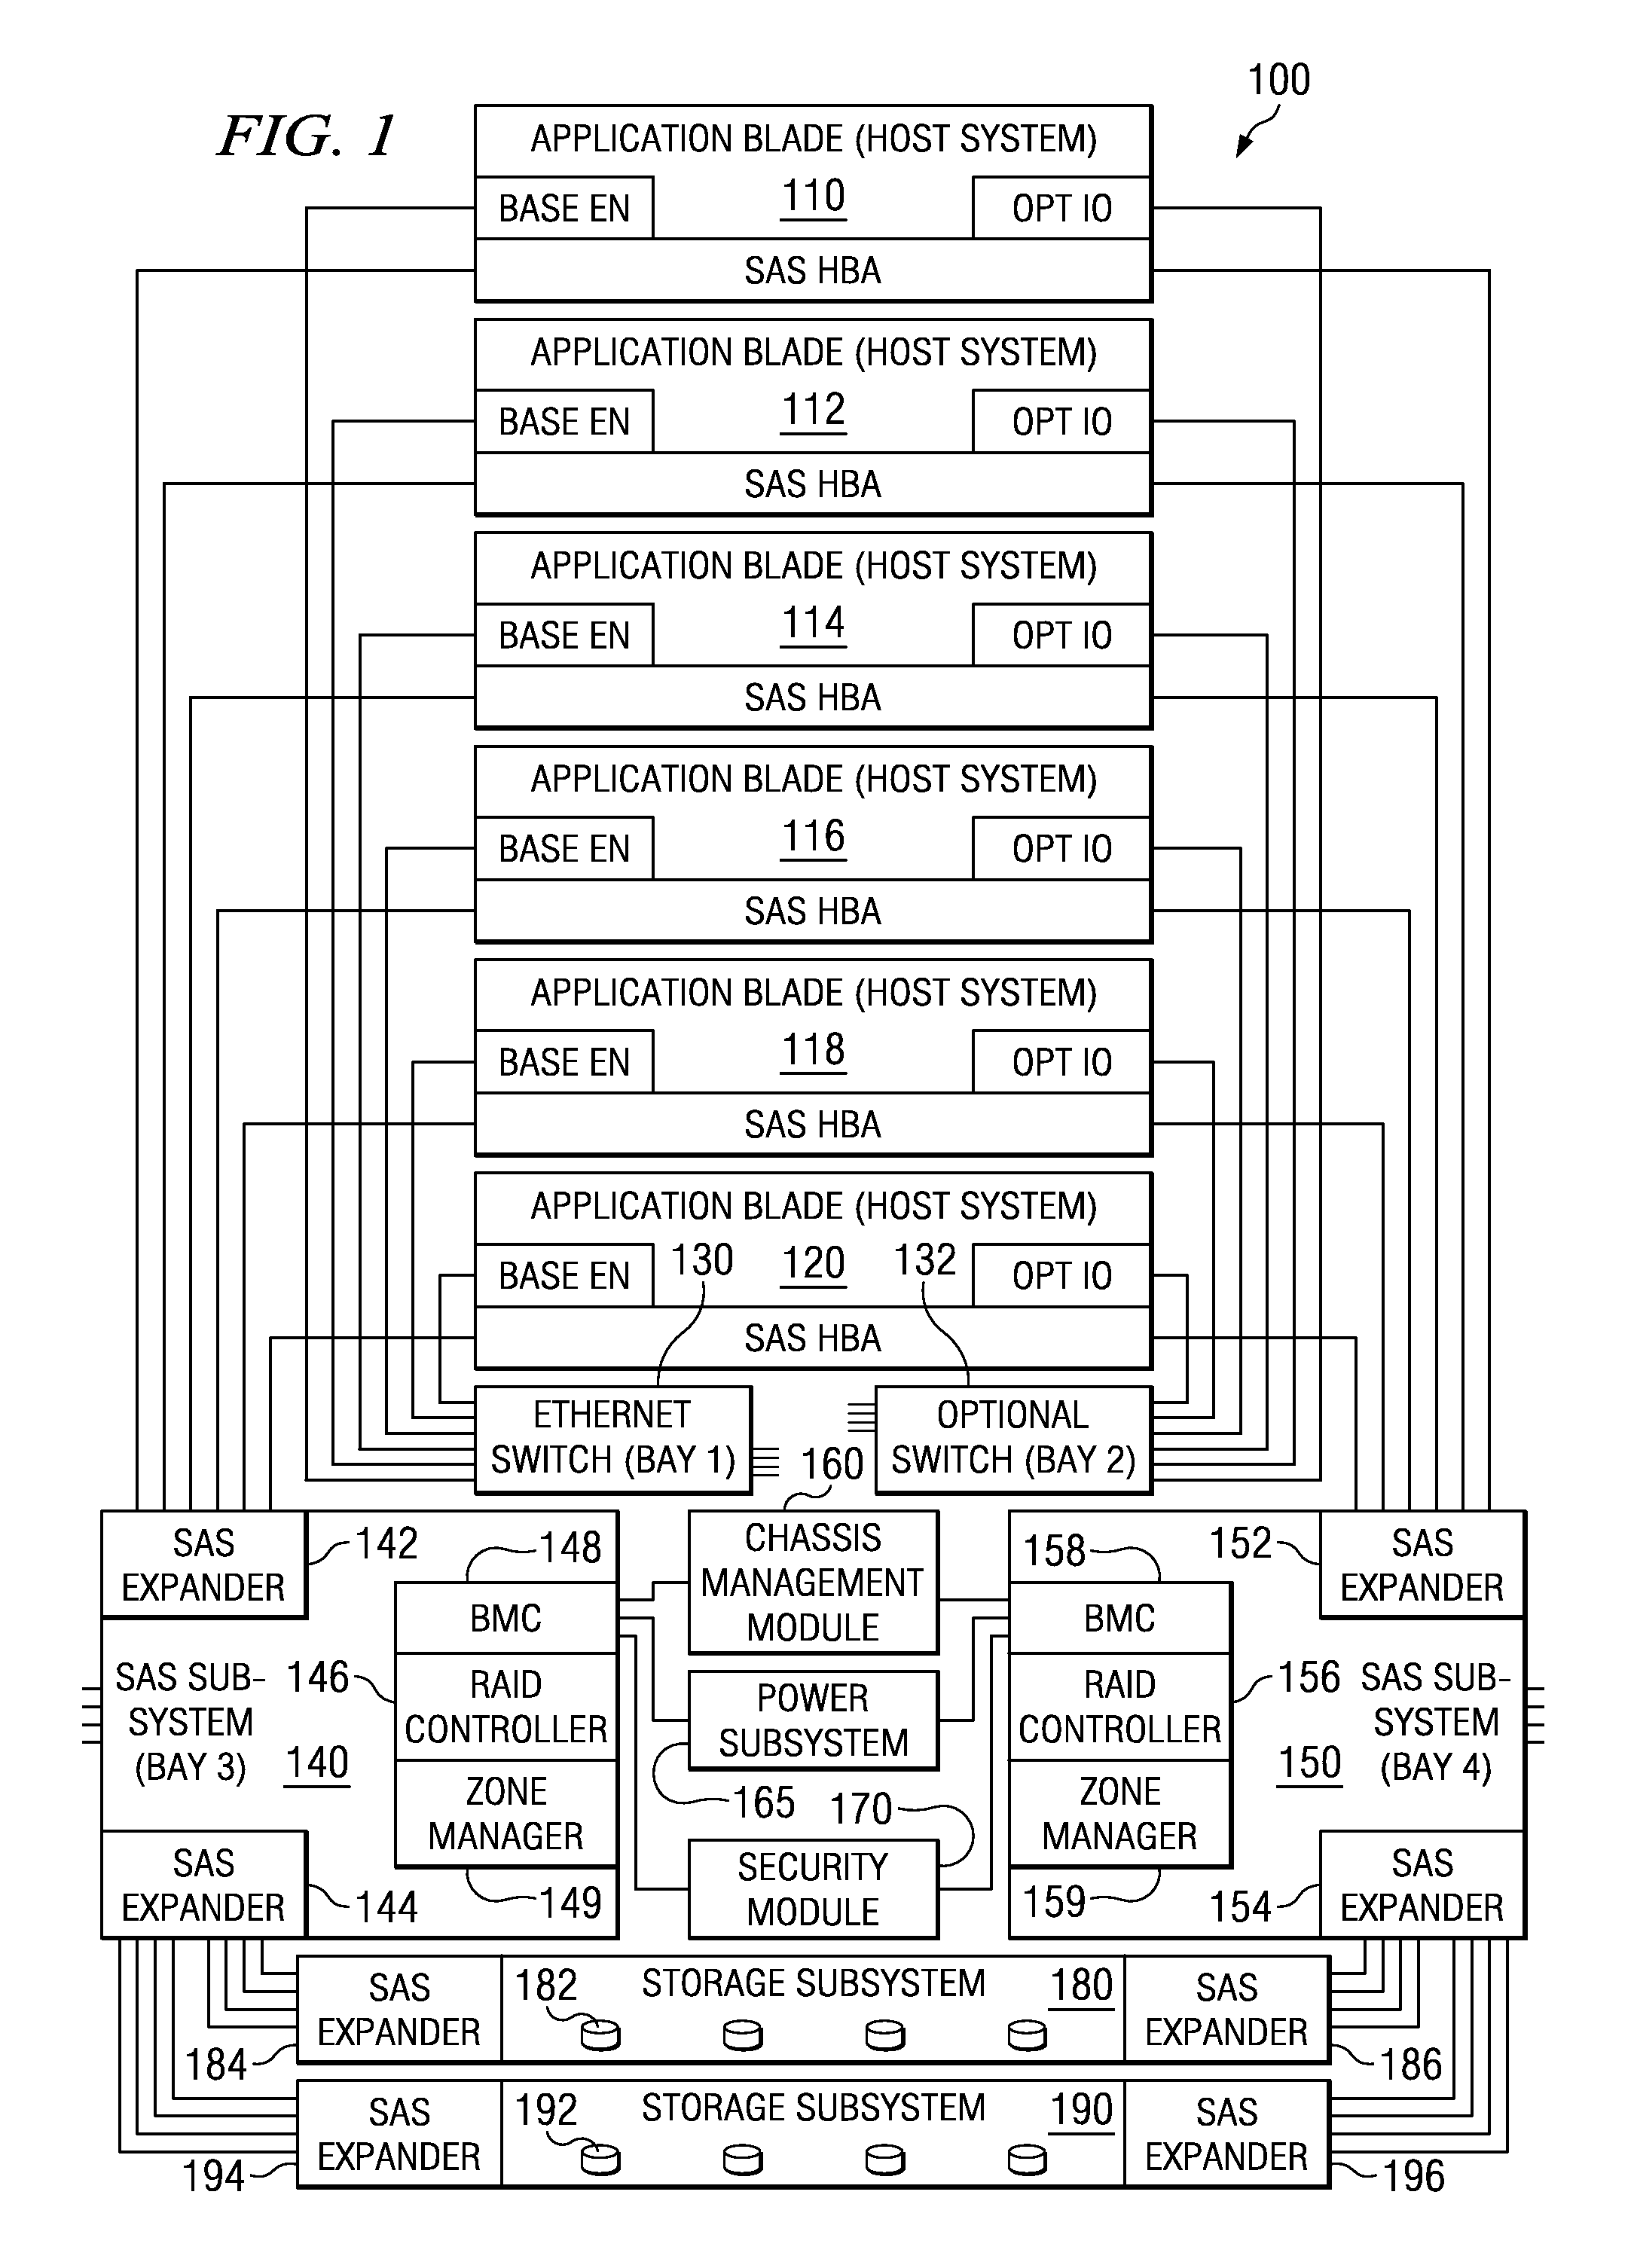 Zoning of devices in a storage area network